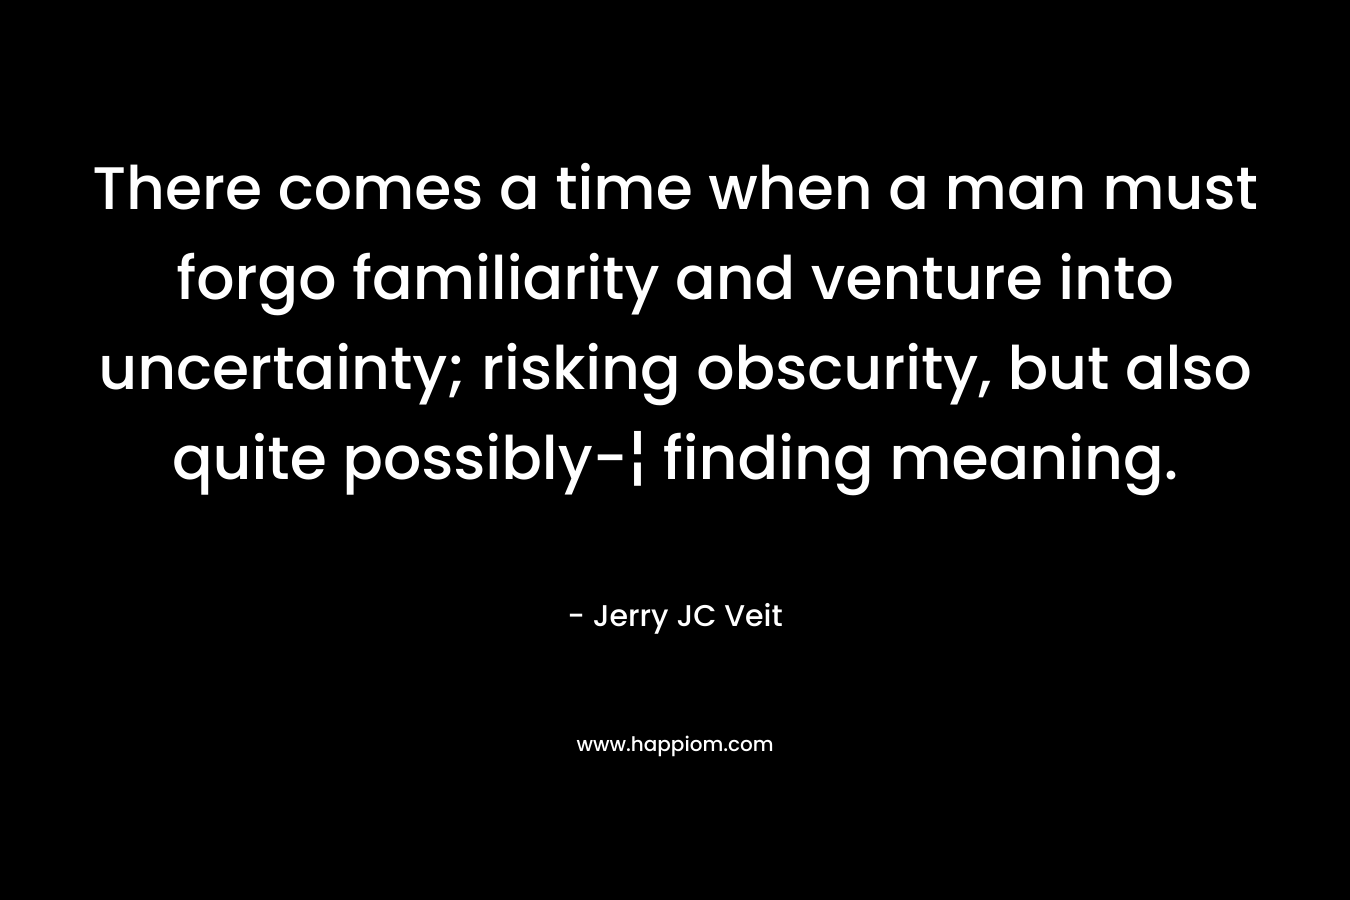 There comes a time when a man must forgo familiarity and venture into uncertainty; risking obscurity, but also quite possibly-¦ finding meaning.